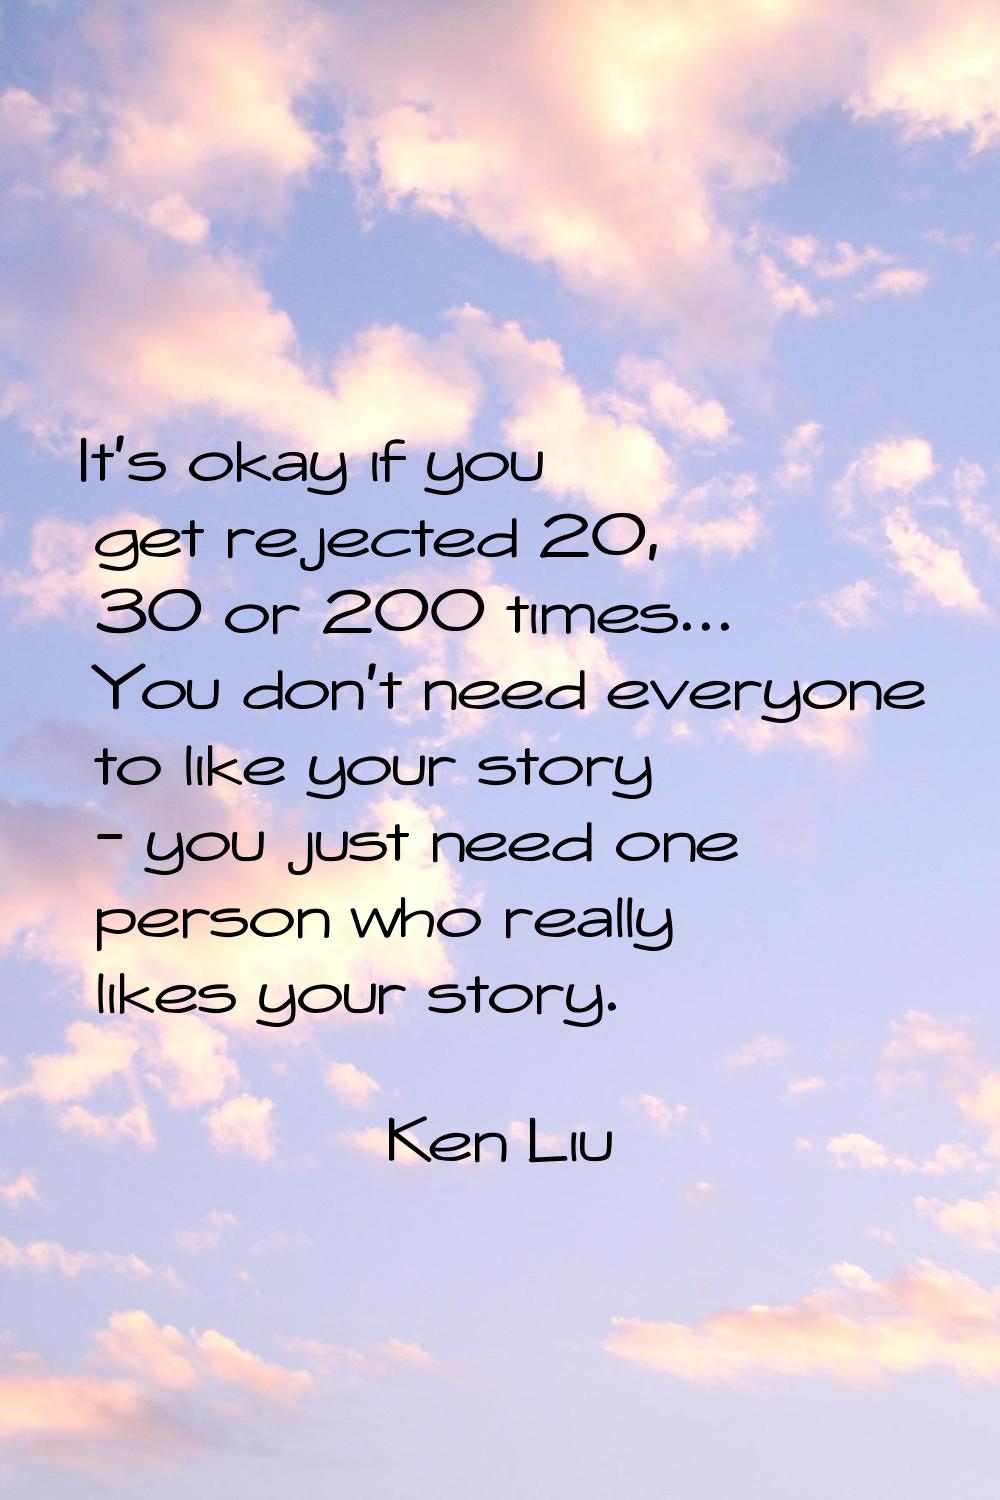 It's okay if you get rejected 20, 30 or 200 times... You don't need everyone to like your story - y